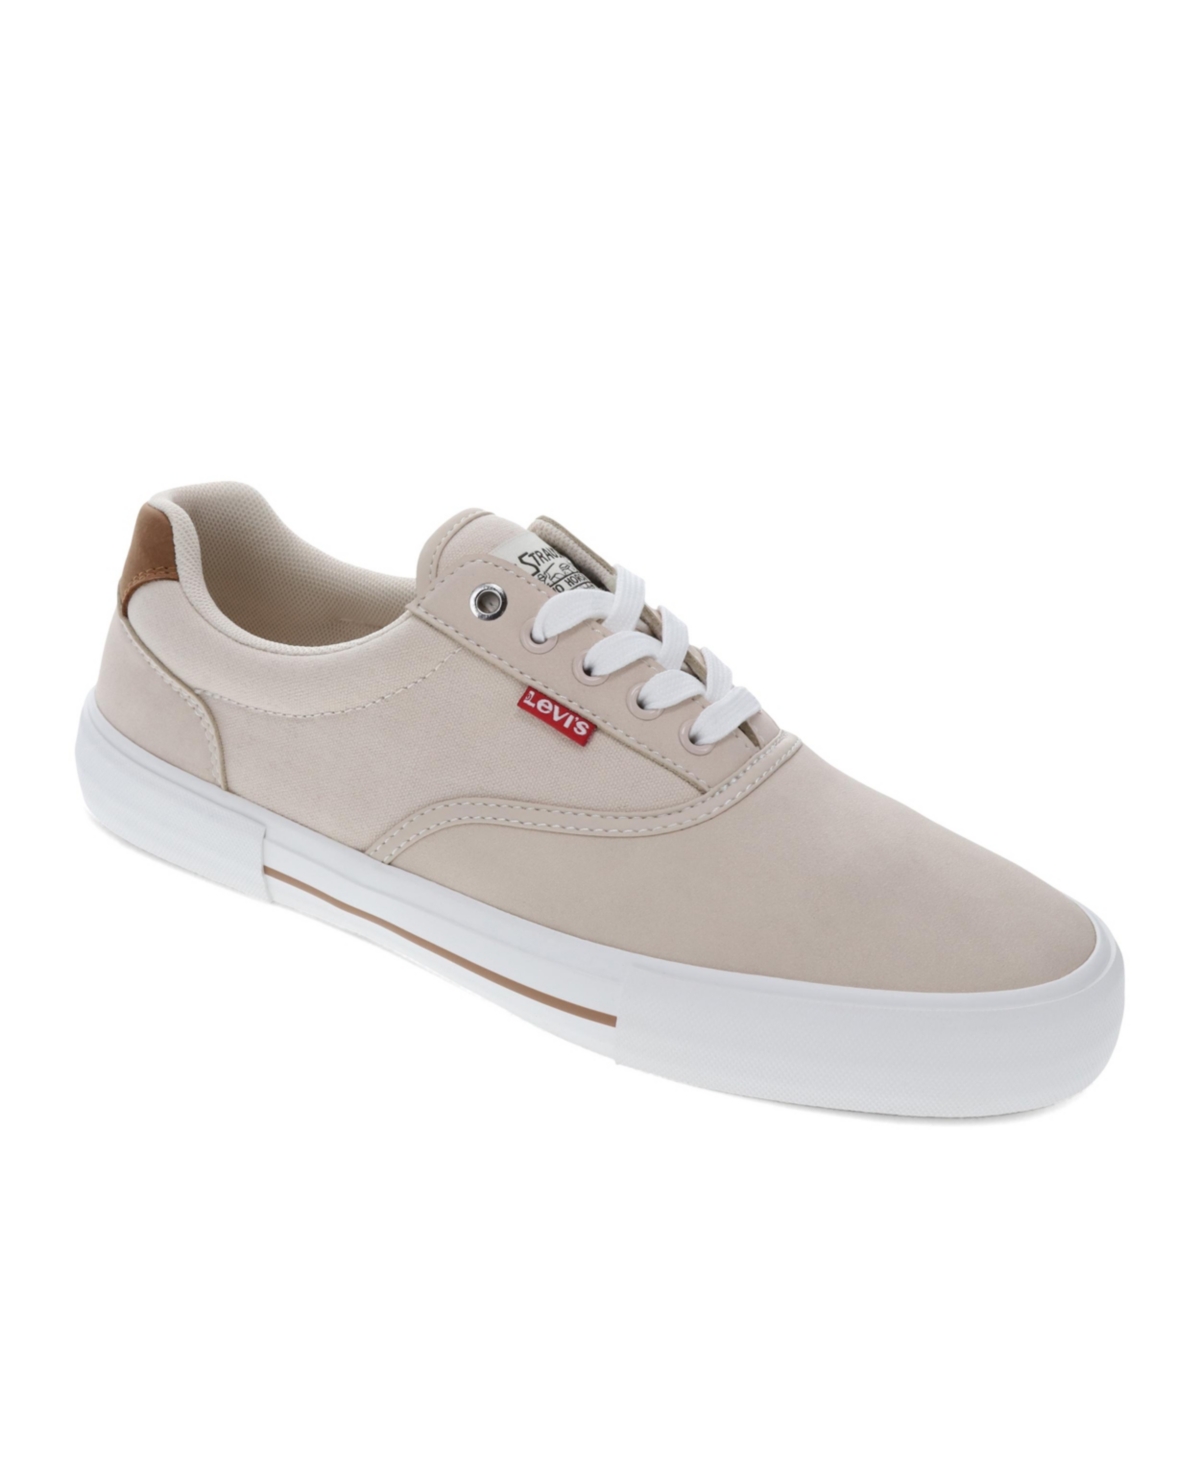 Shop Levi's Men's Thane Fashion Athletic Lace Up Sneakers In Sand,tan